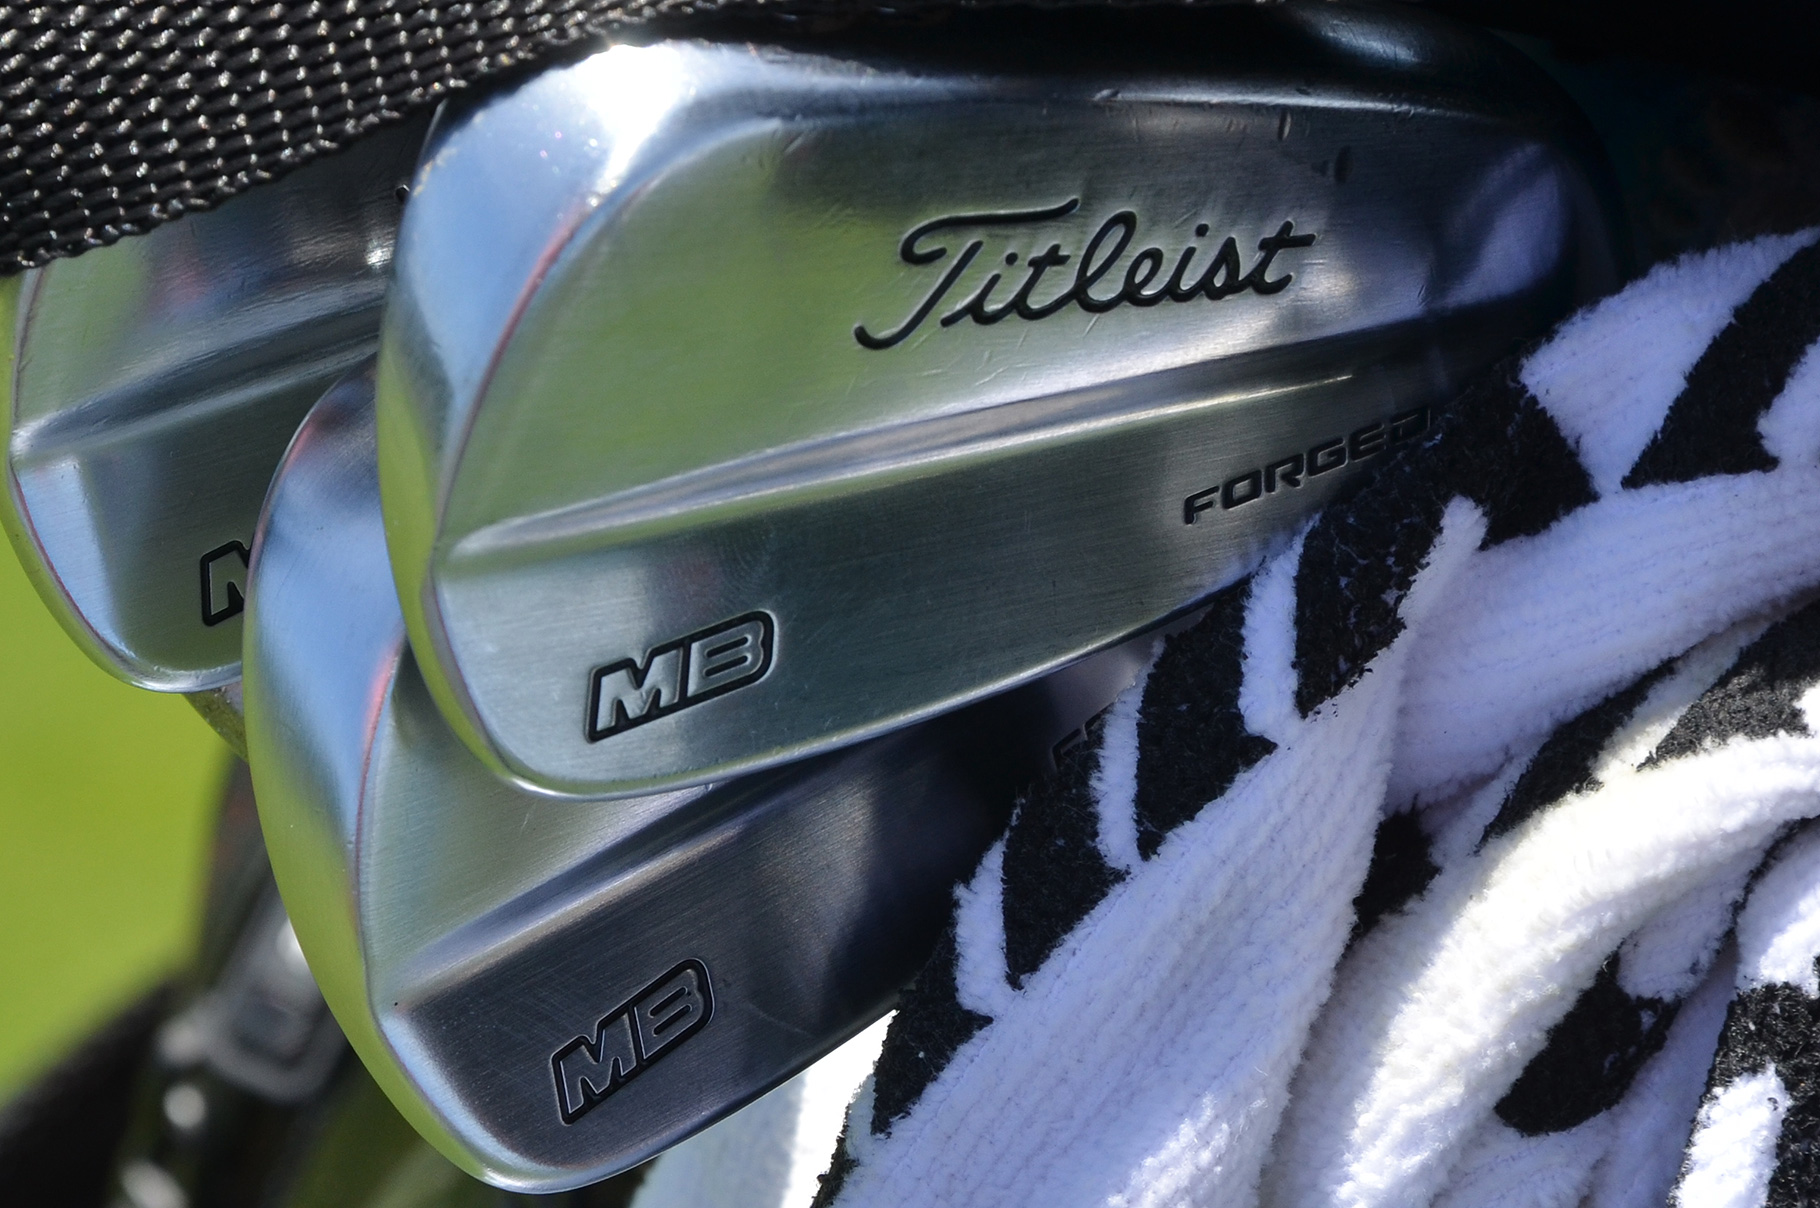 Irons used by top 10 golfers before the 2019 Tour Championship